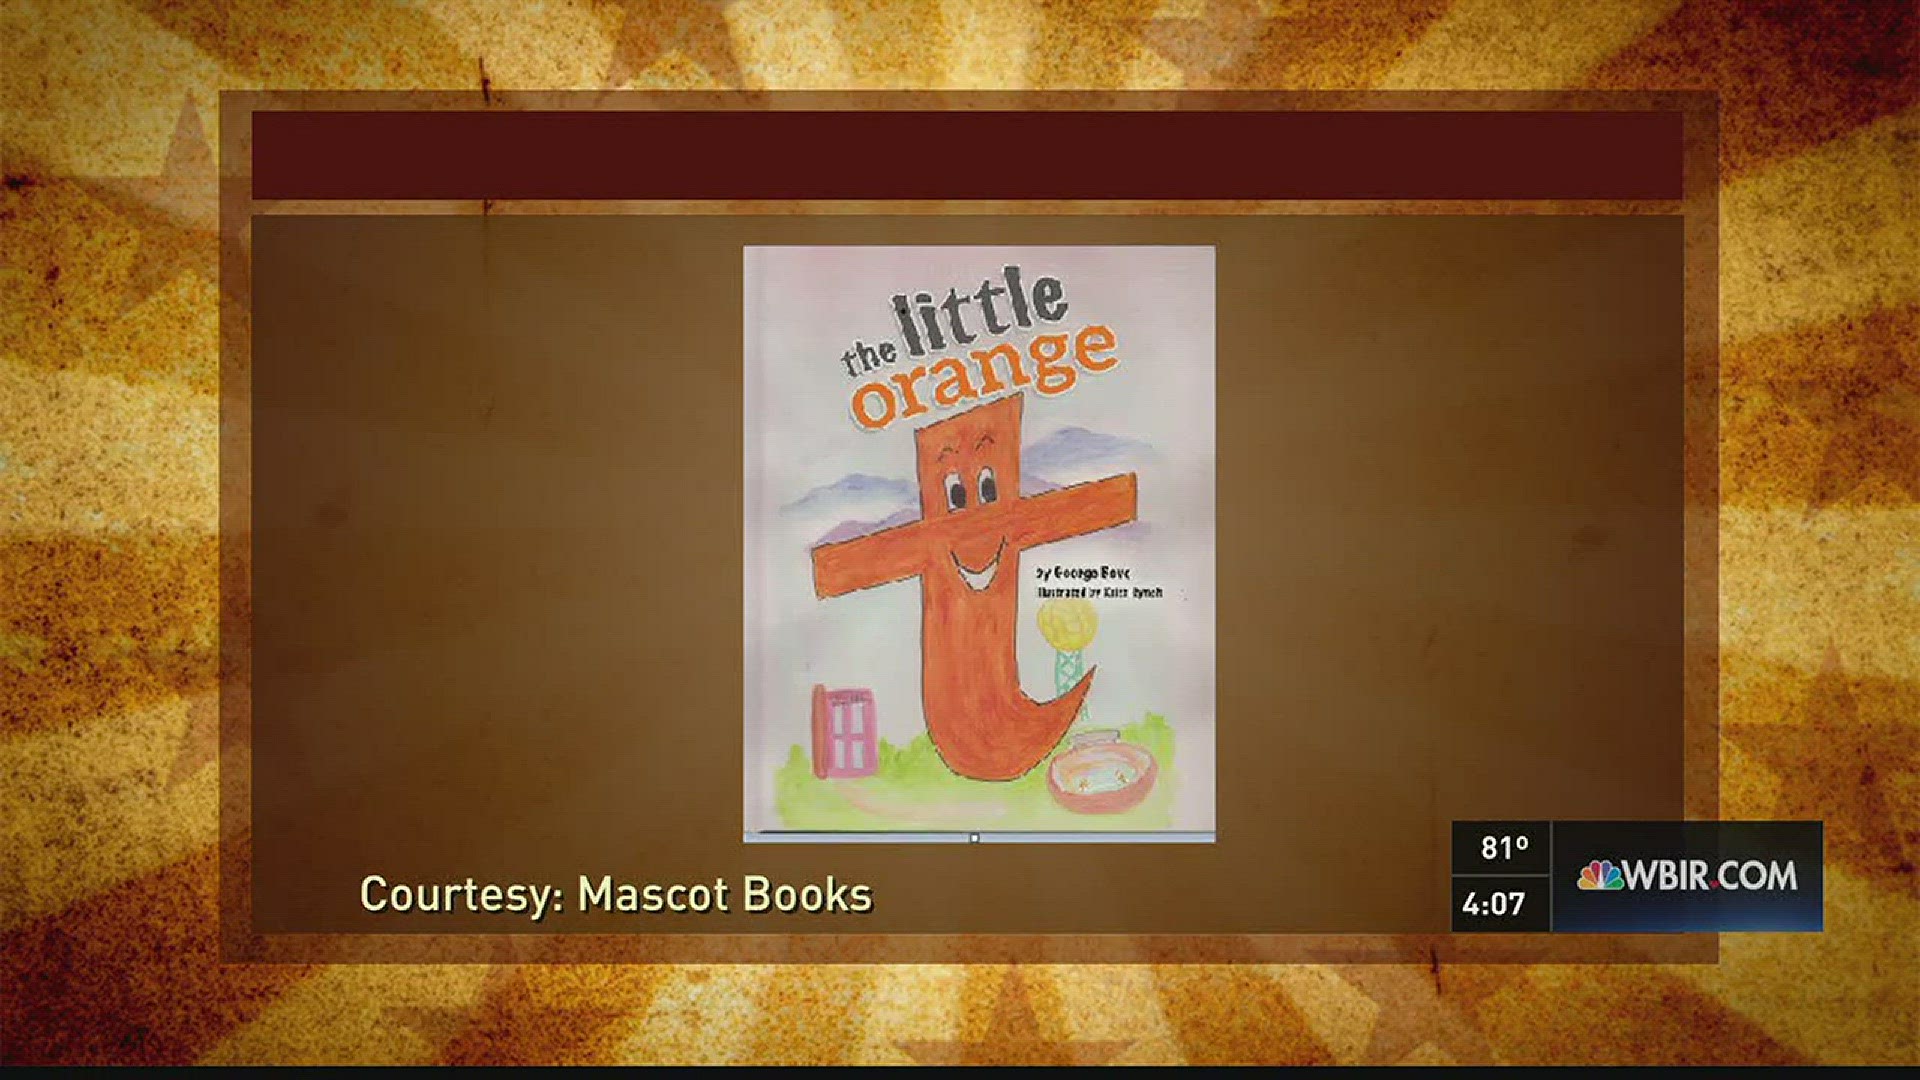 April 29, 2016Live at Five at 4George Bove talks about the illustrated book he wrote called "The Little Orange t" littleoranget.comFacebook: little orange tTwitter: @littleoranget